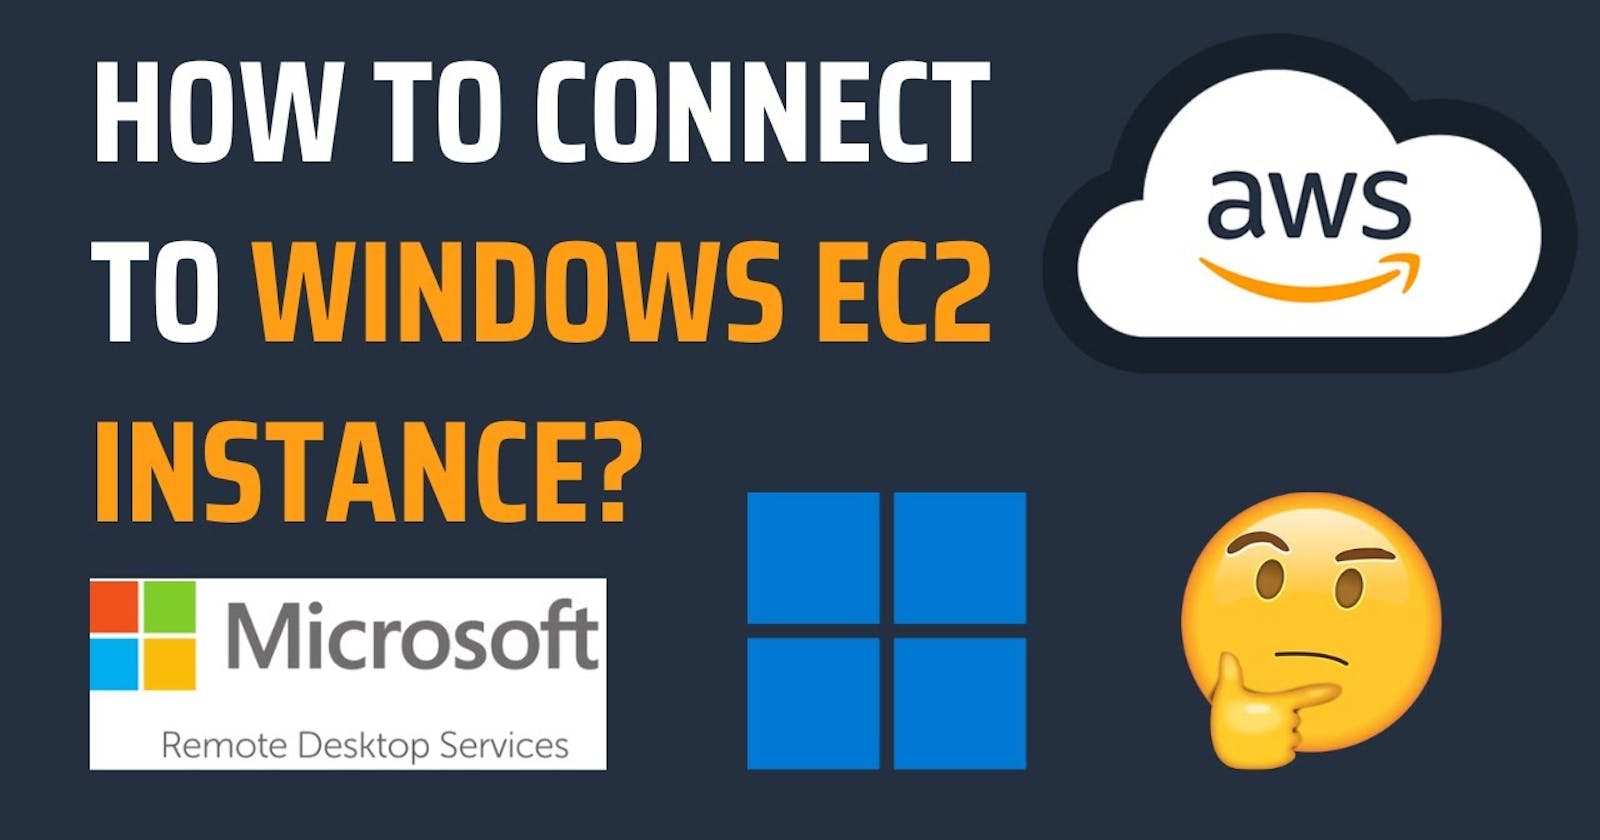 Connecting Window Local Machine to EC2 instance